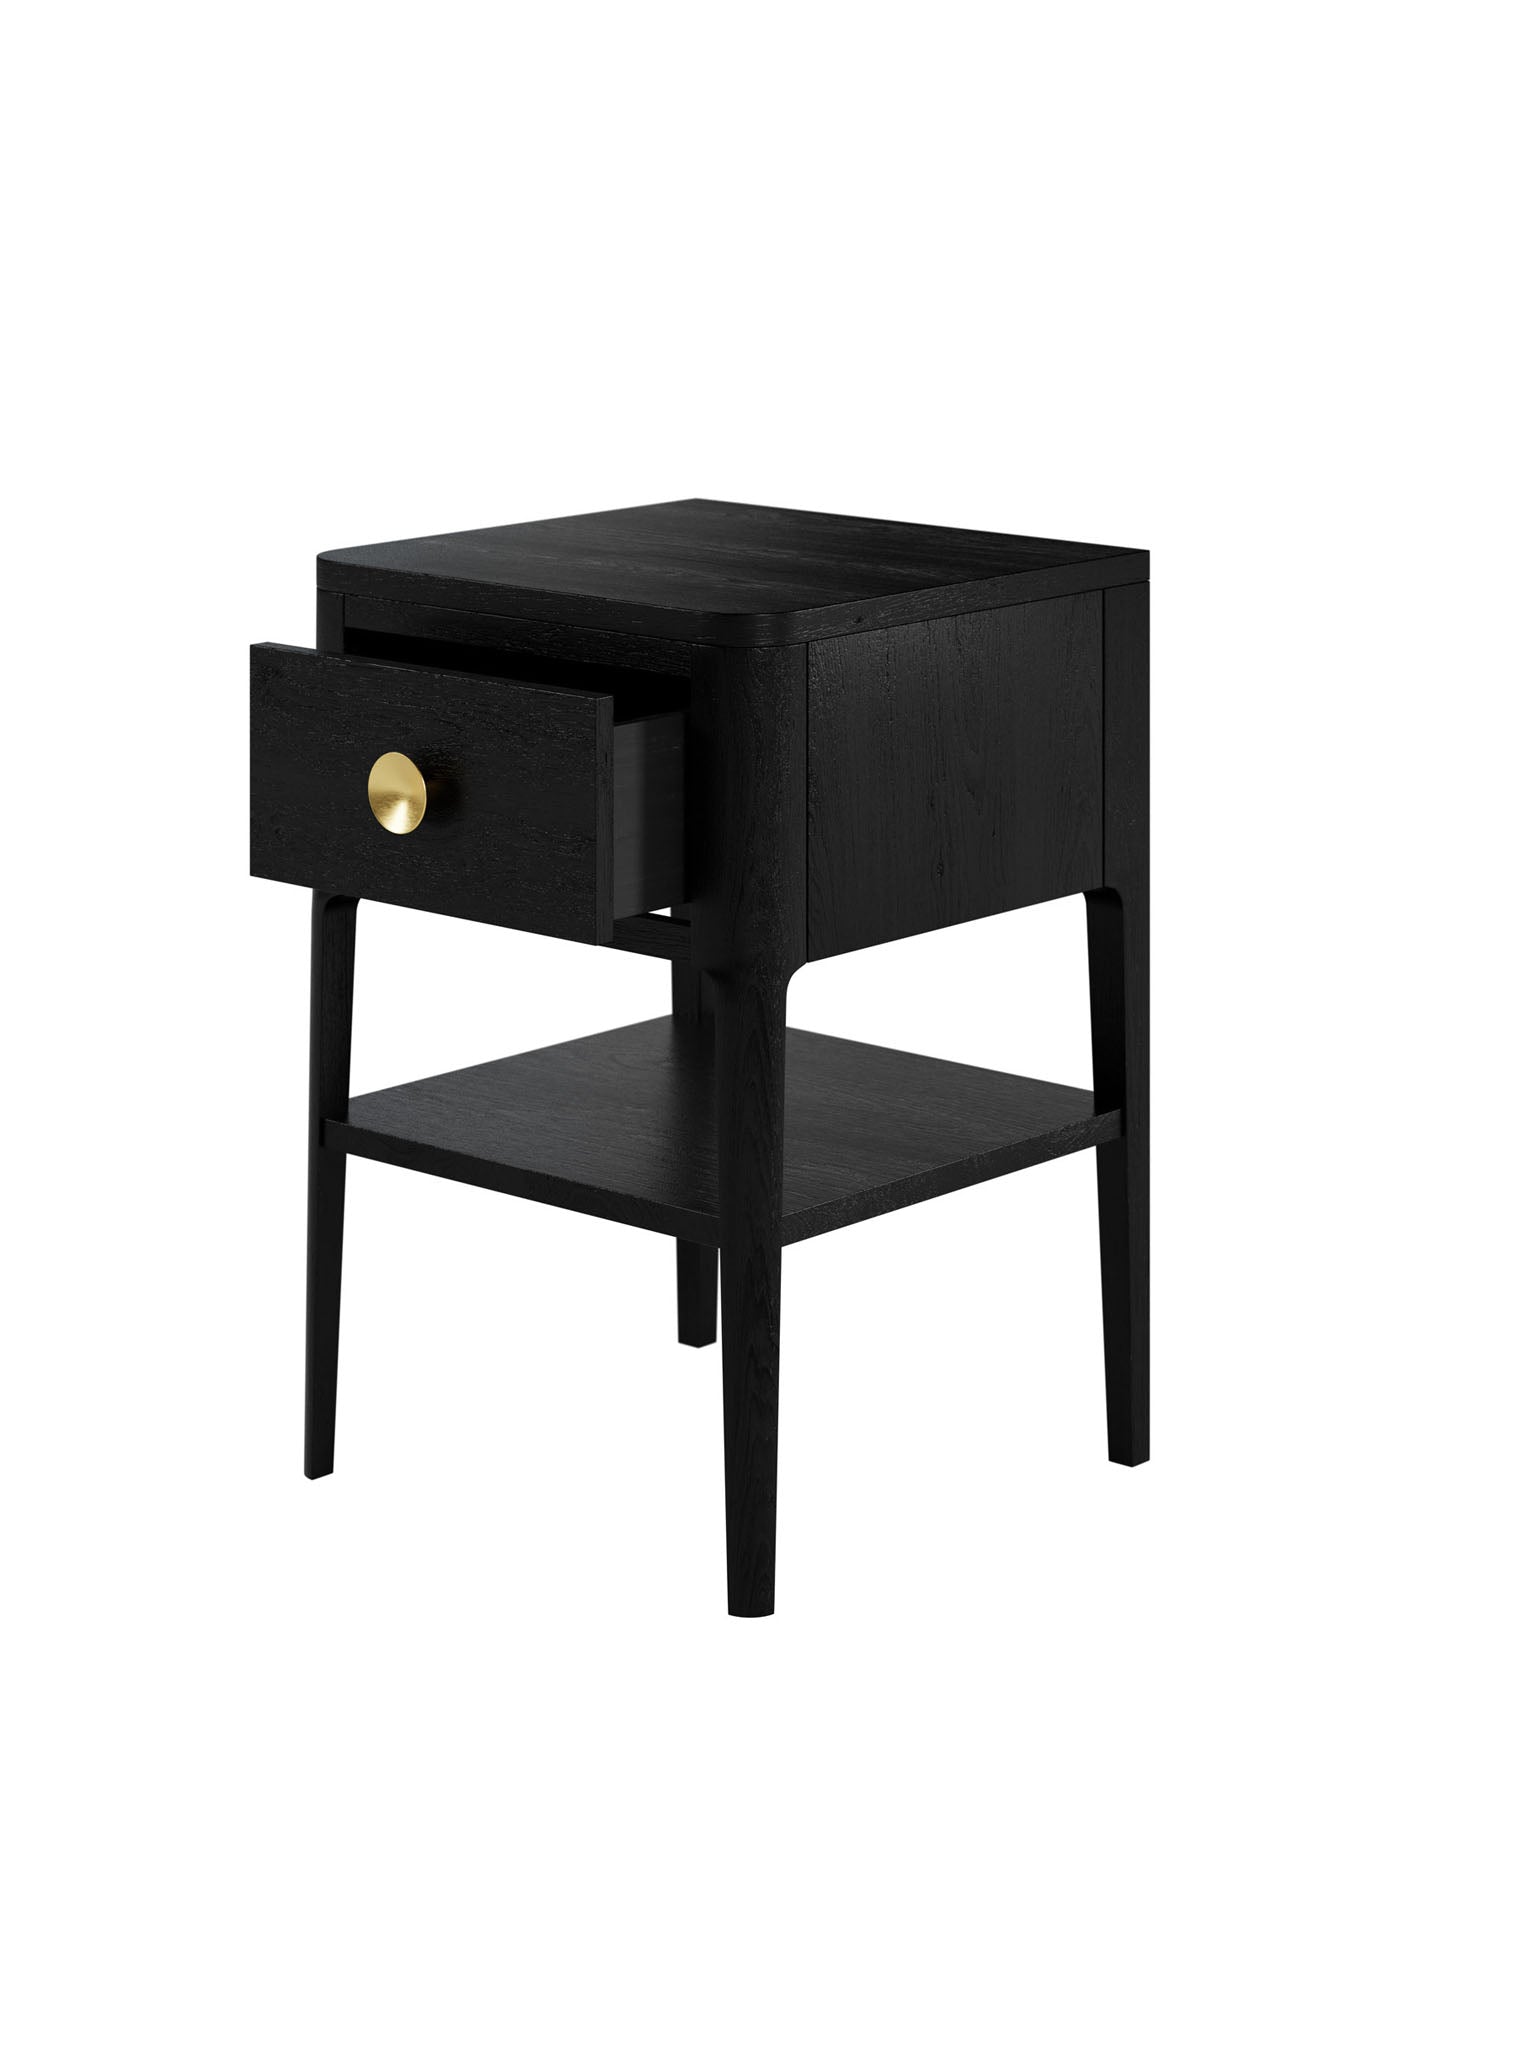 Black one drawer oak bedside table with brass style round handle